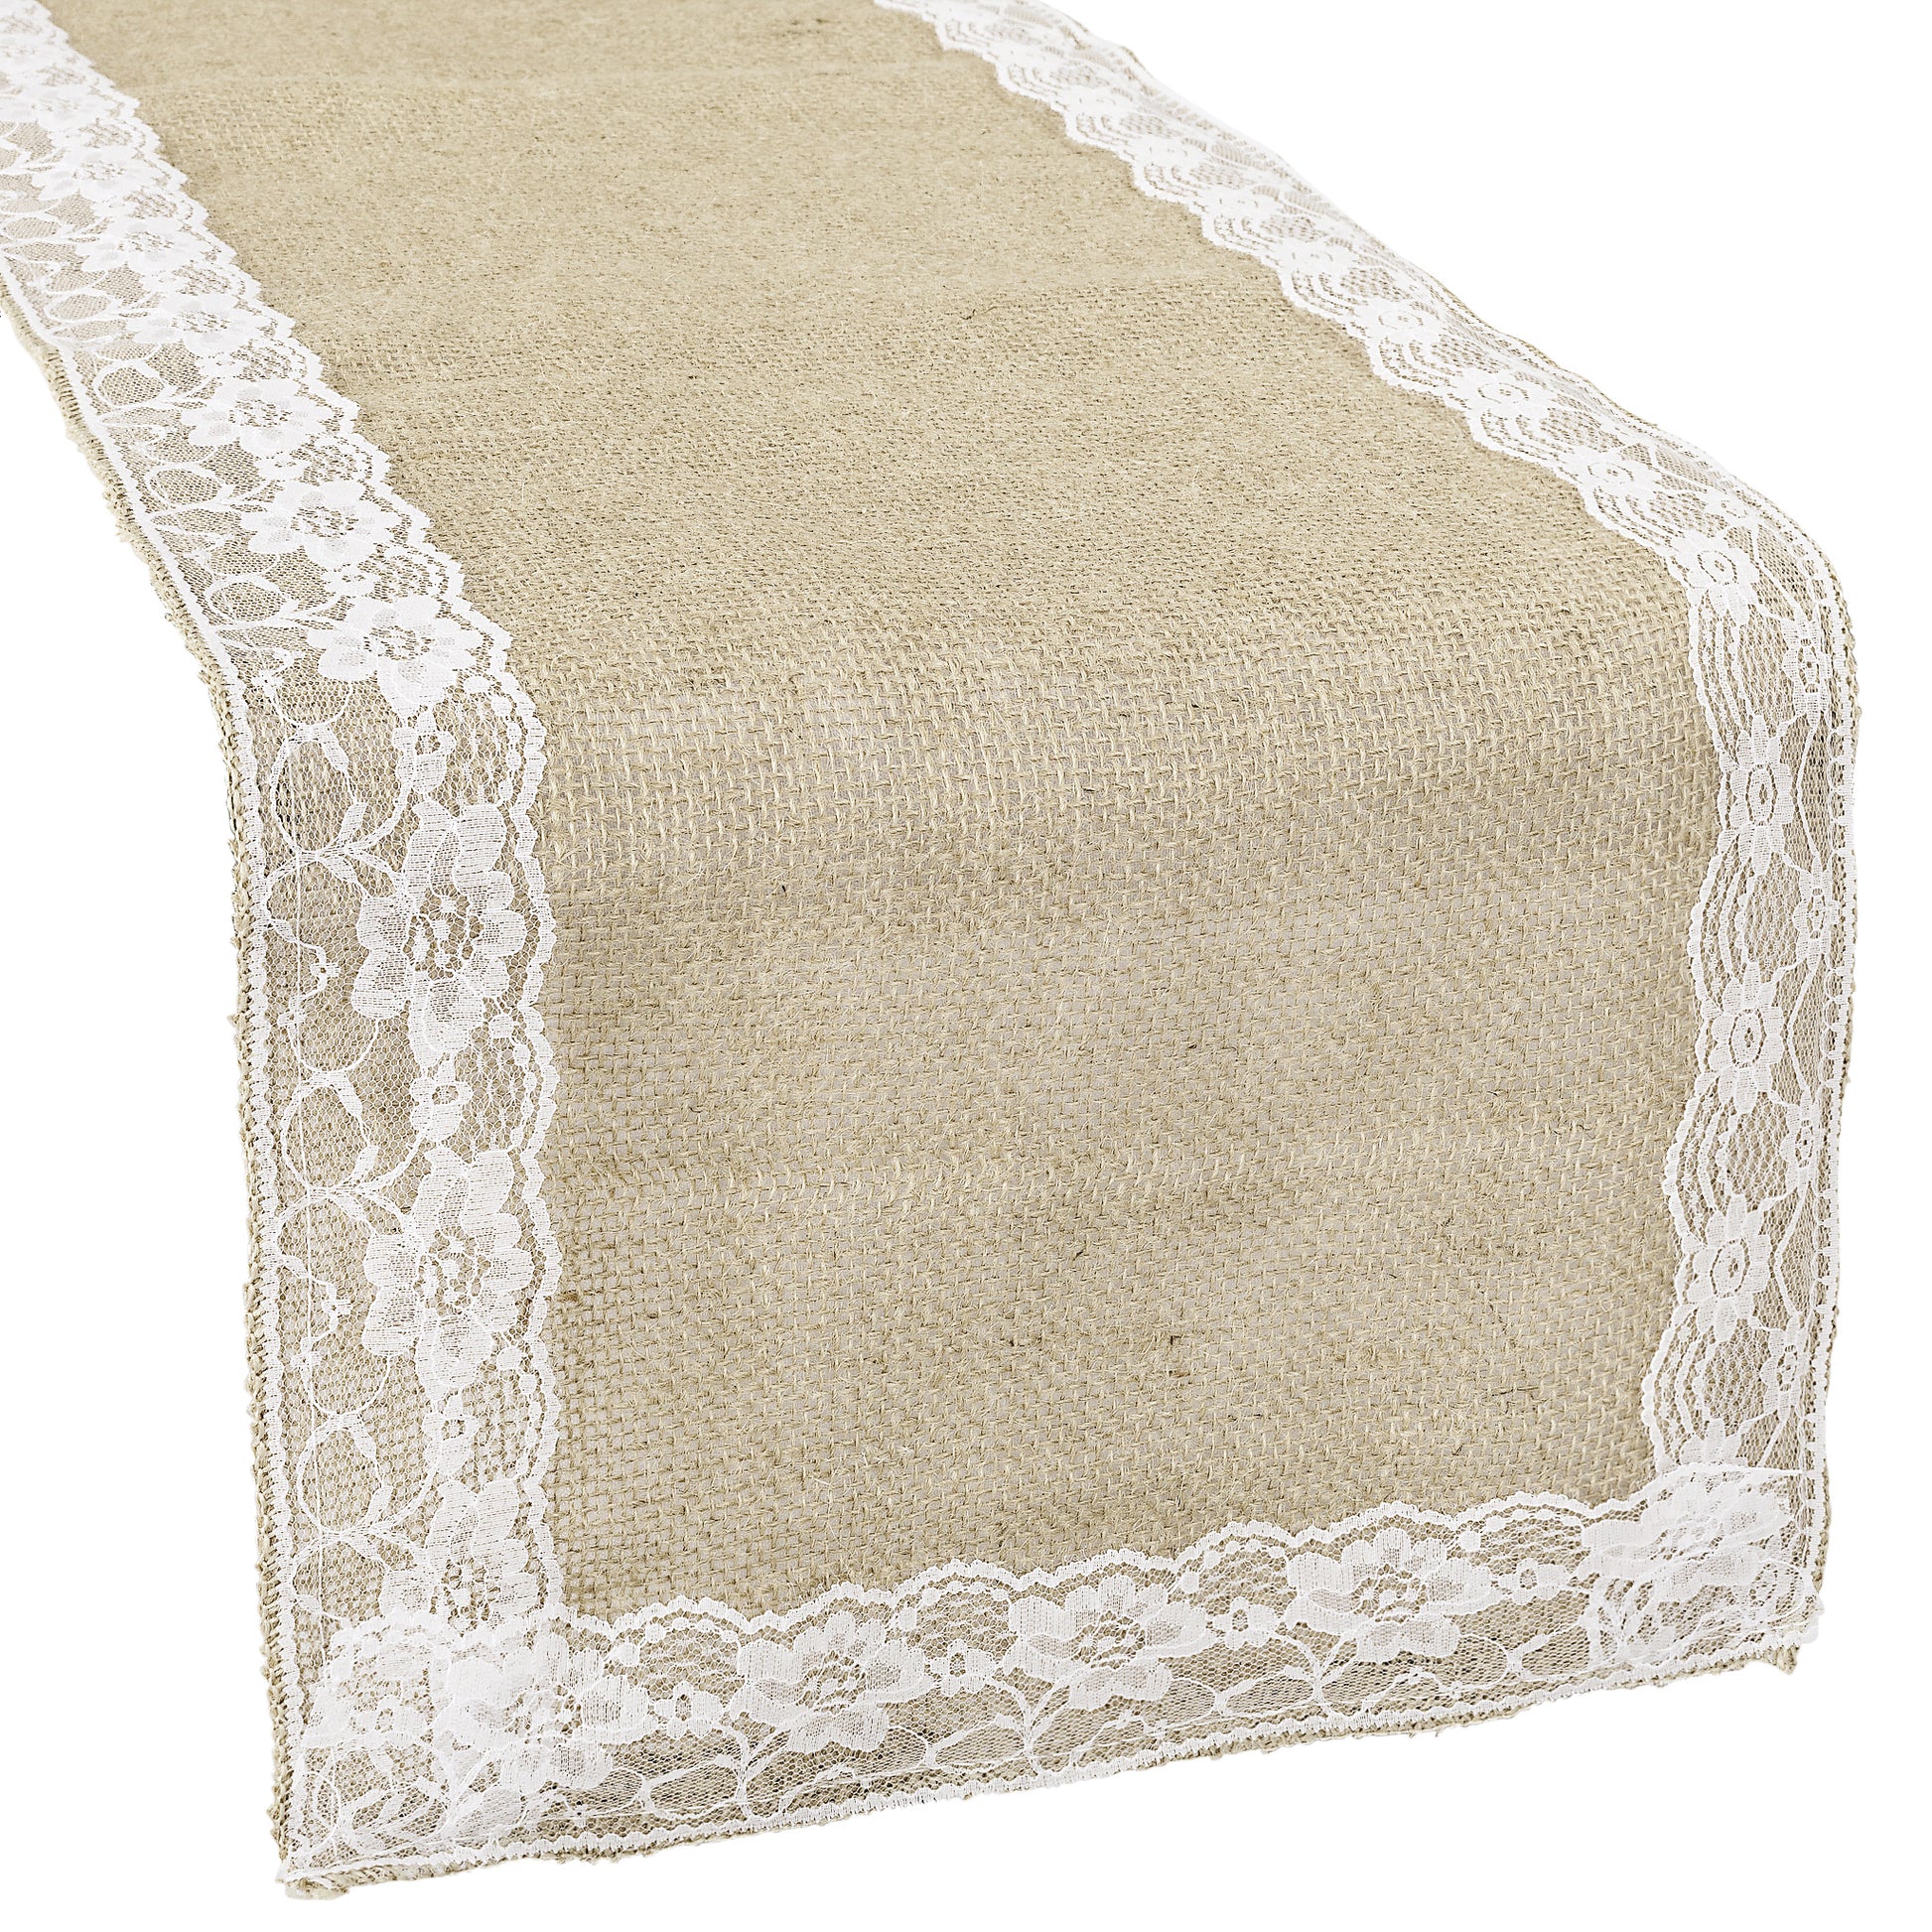 Burlap Lace Table Runner 13"x108" - Natural & White